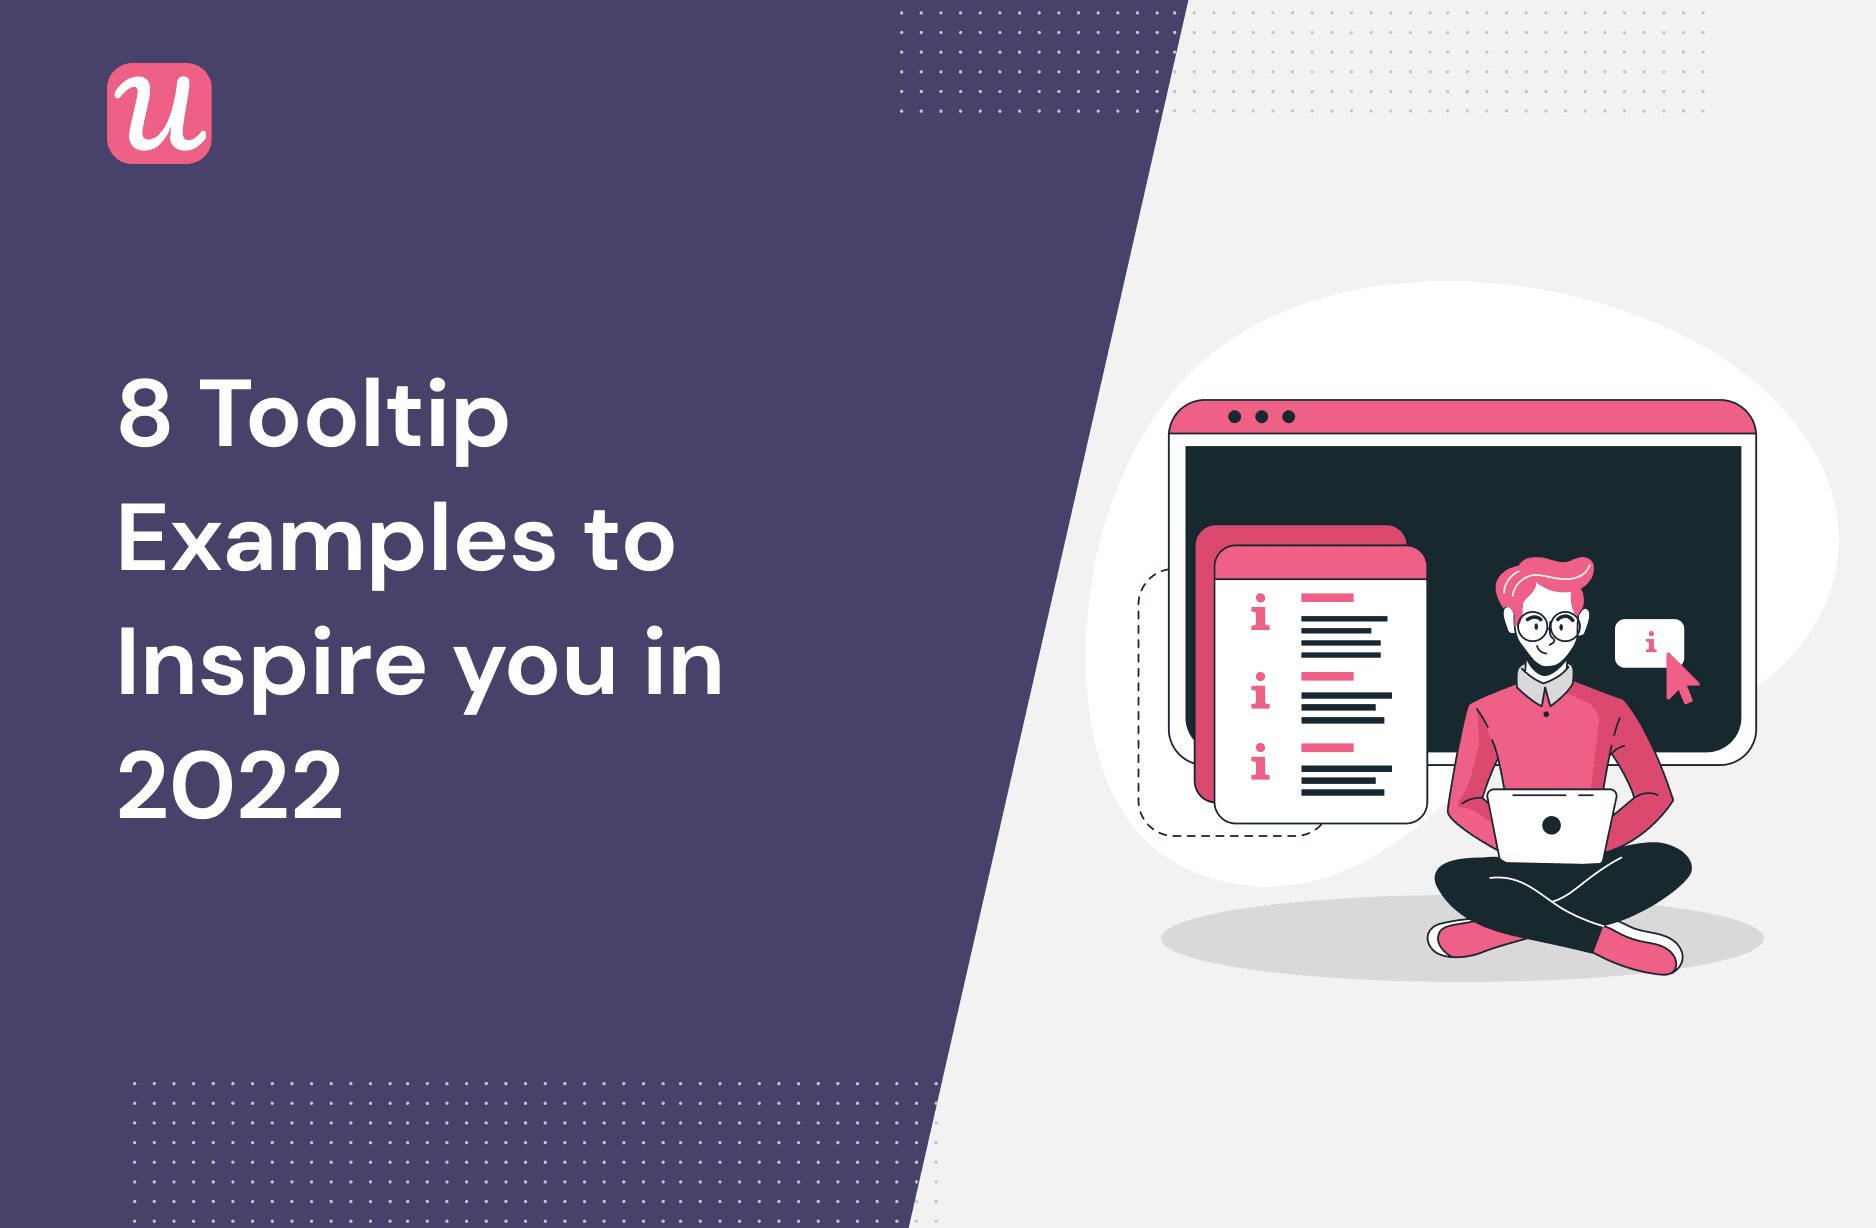 8 Tooltip Examples to Inspire You in 2022